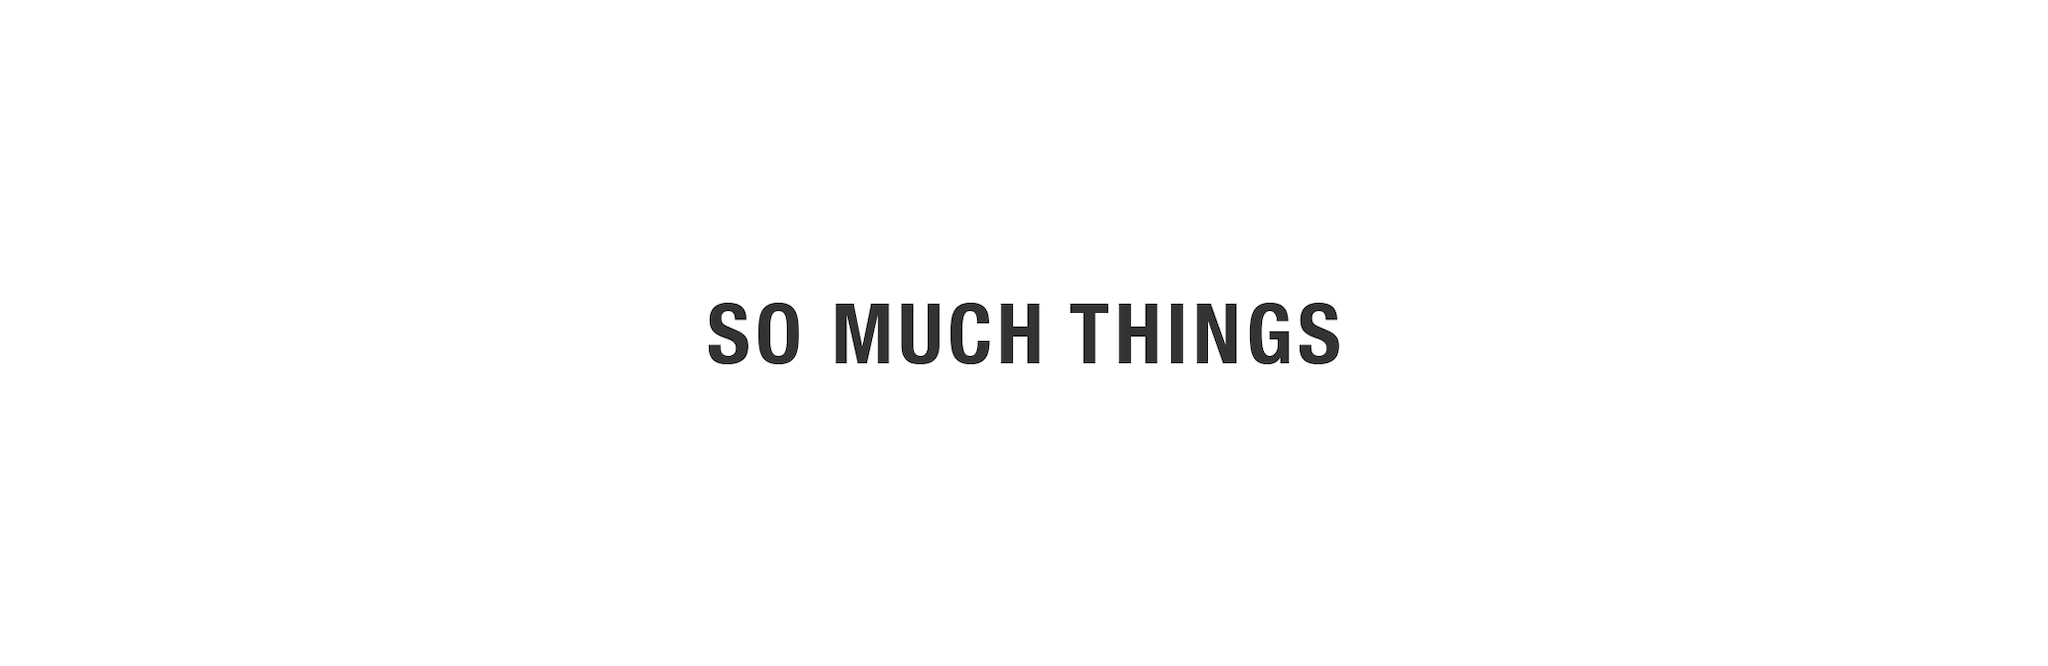 SO MUCH THINGS